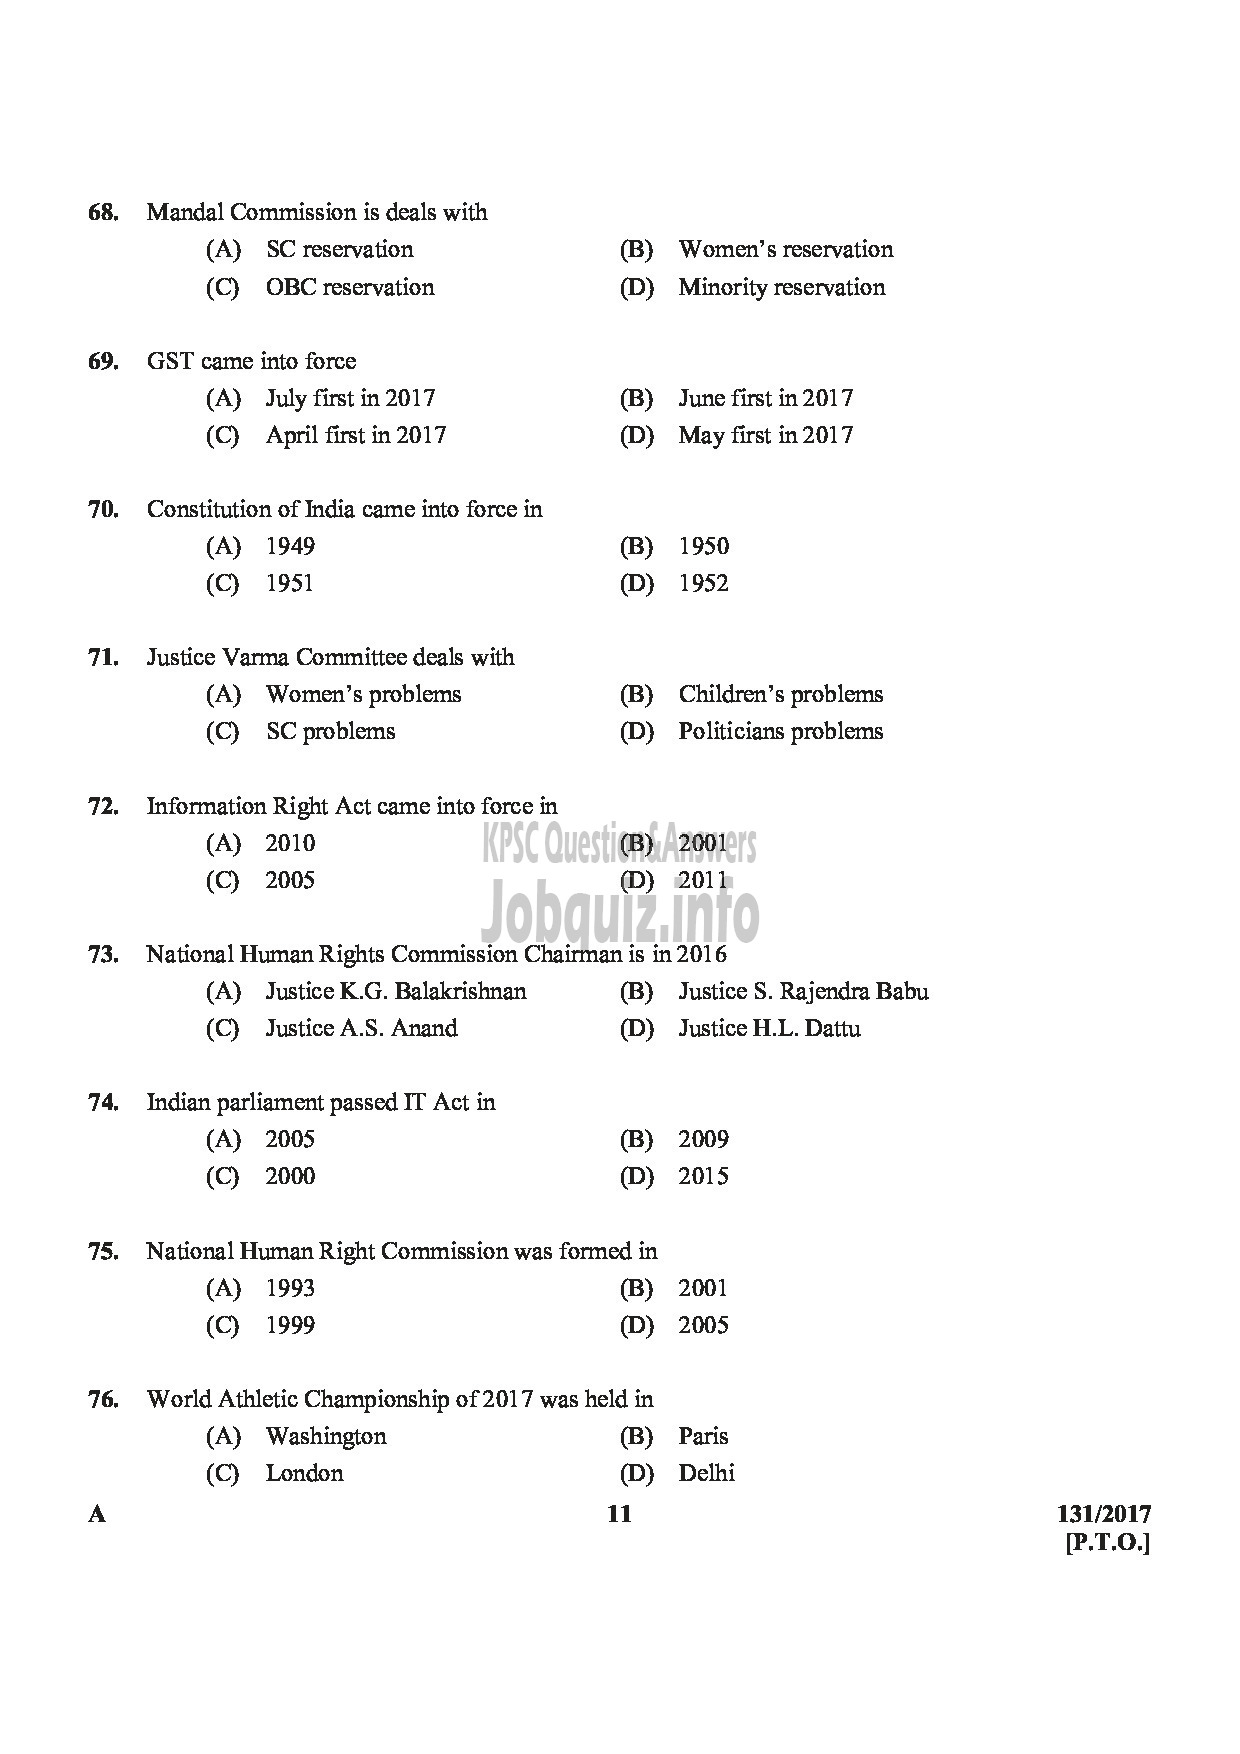 Kerala PSC Question Paper - FIREMAN DRIVER CUM PUMP OPERATOR TRAINEE SR FROM AMONG SC/ST ONLY FIRE AND RESCUE SERVICE-11